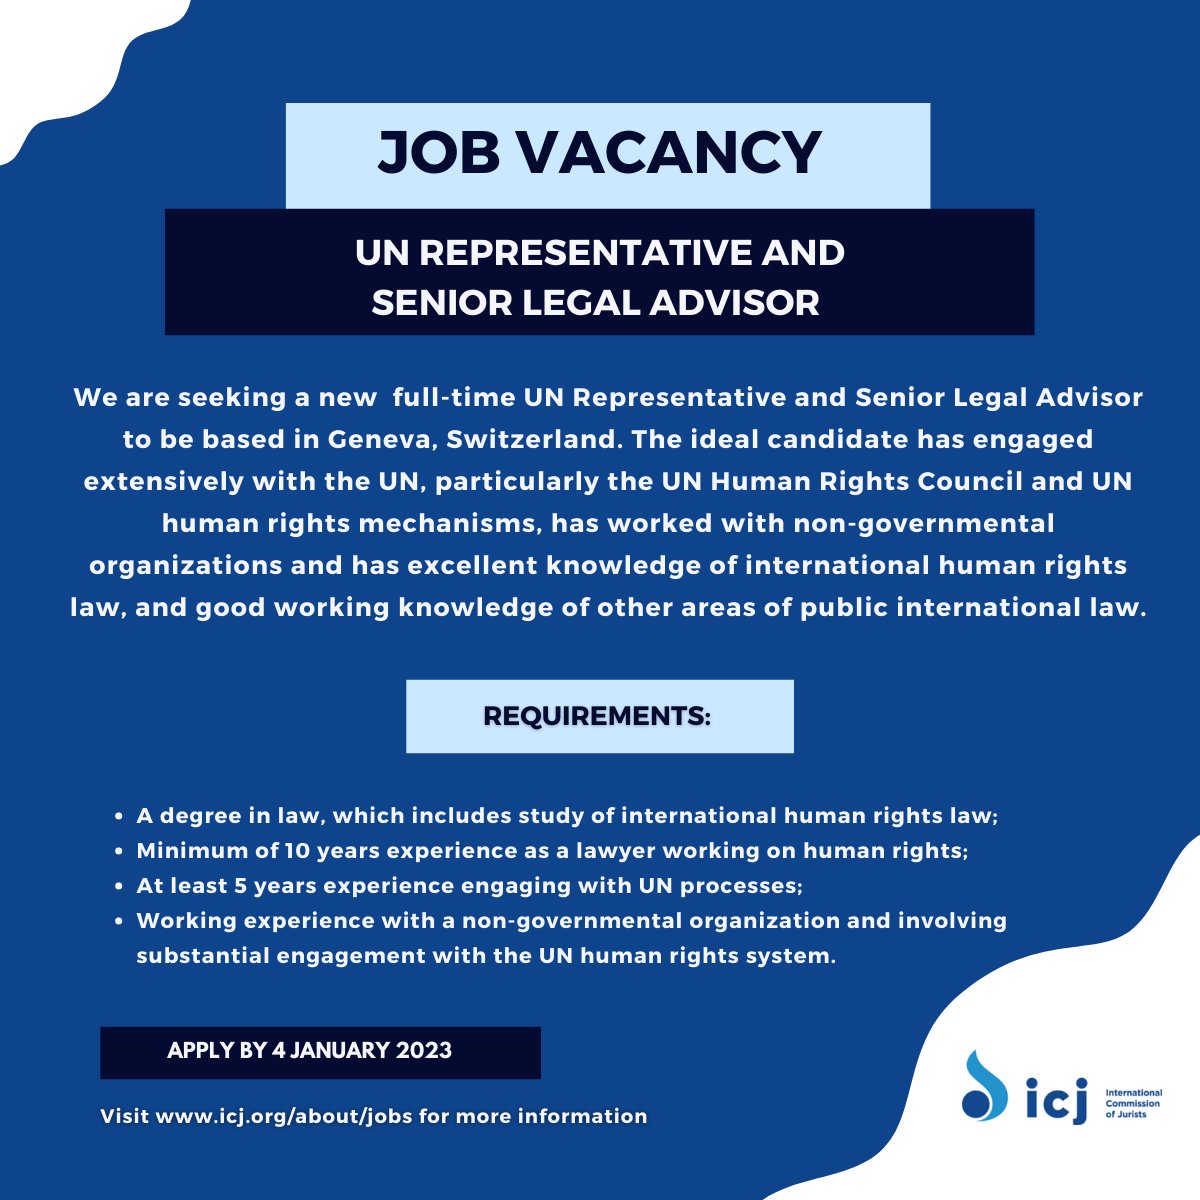 📢 #WeAreHiring! 

Are you a #humanrights lawyer with experience working in #NGOs & engaging with UN processes? #ApplyNow to be our UN Rep & Snr Legal Adviser in Geneva!

Visit our website for more details about this exciting position: icj2.wpenginepowered.com/wp-content/upl…

#HumanRightsJobs